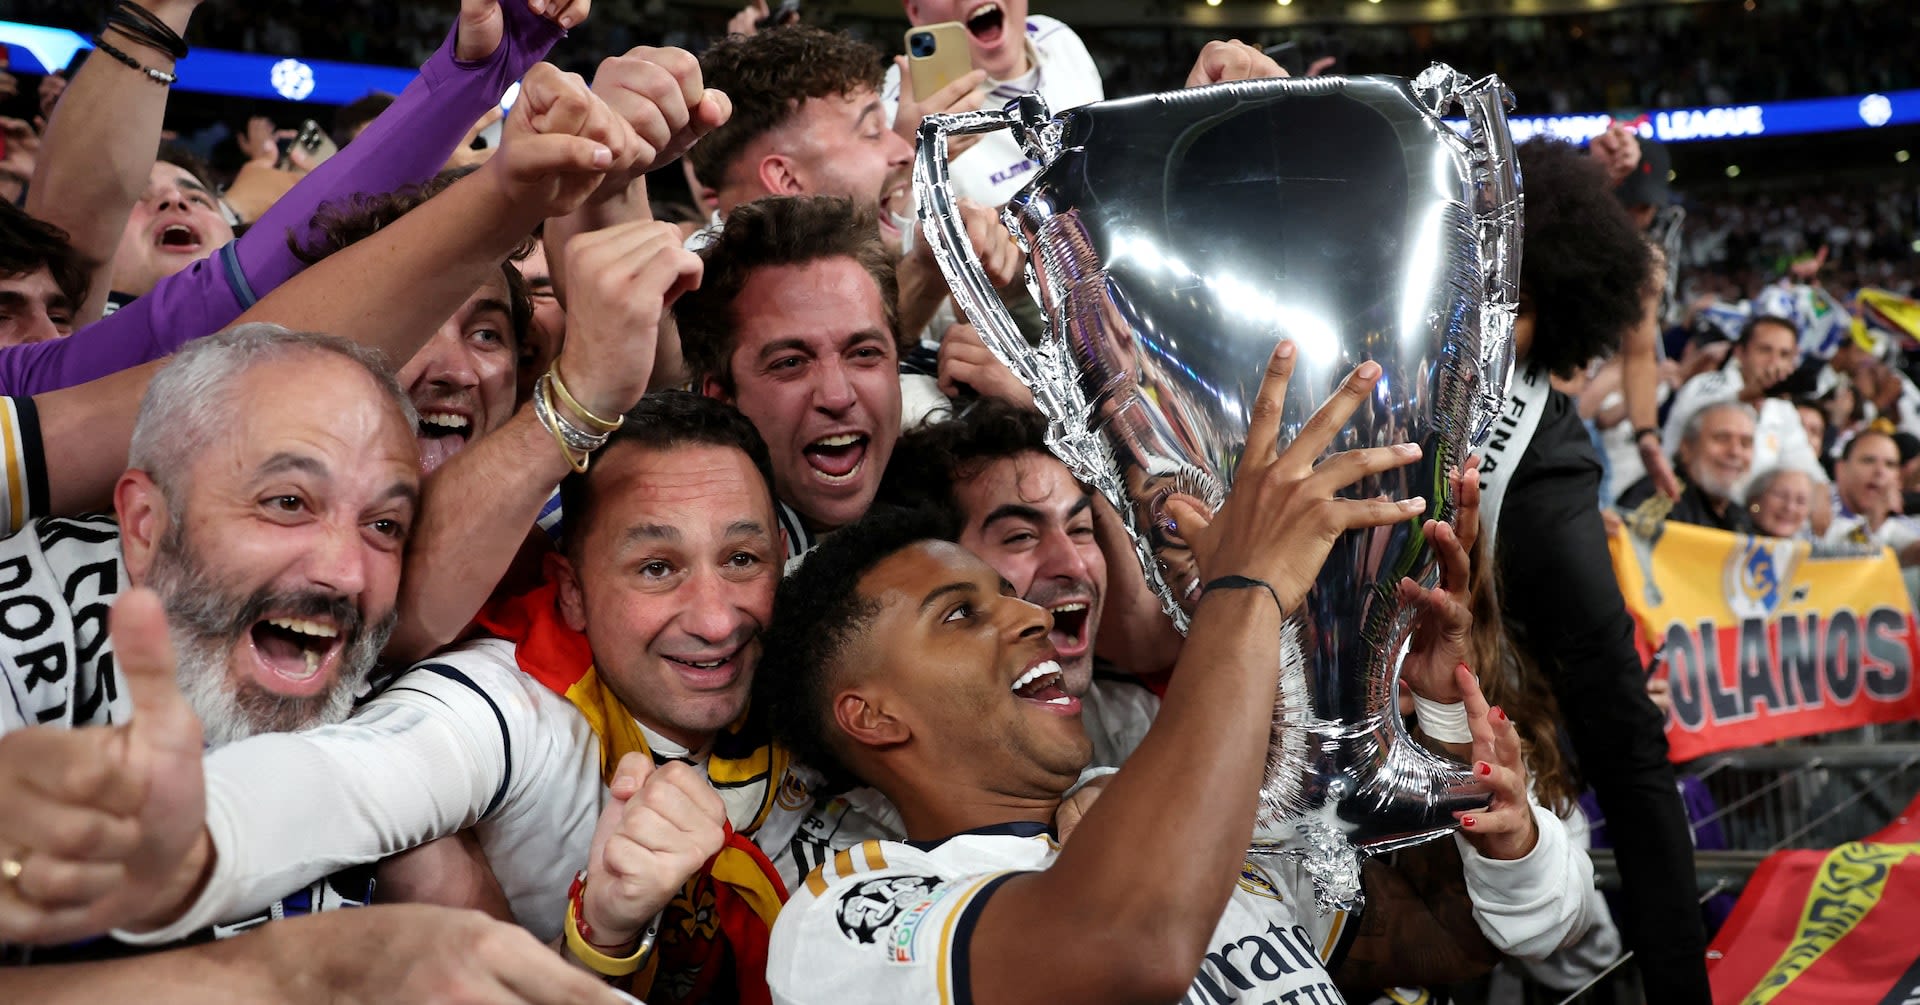 Real Madrid come full circle with second great European dynasty